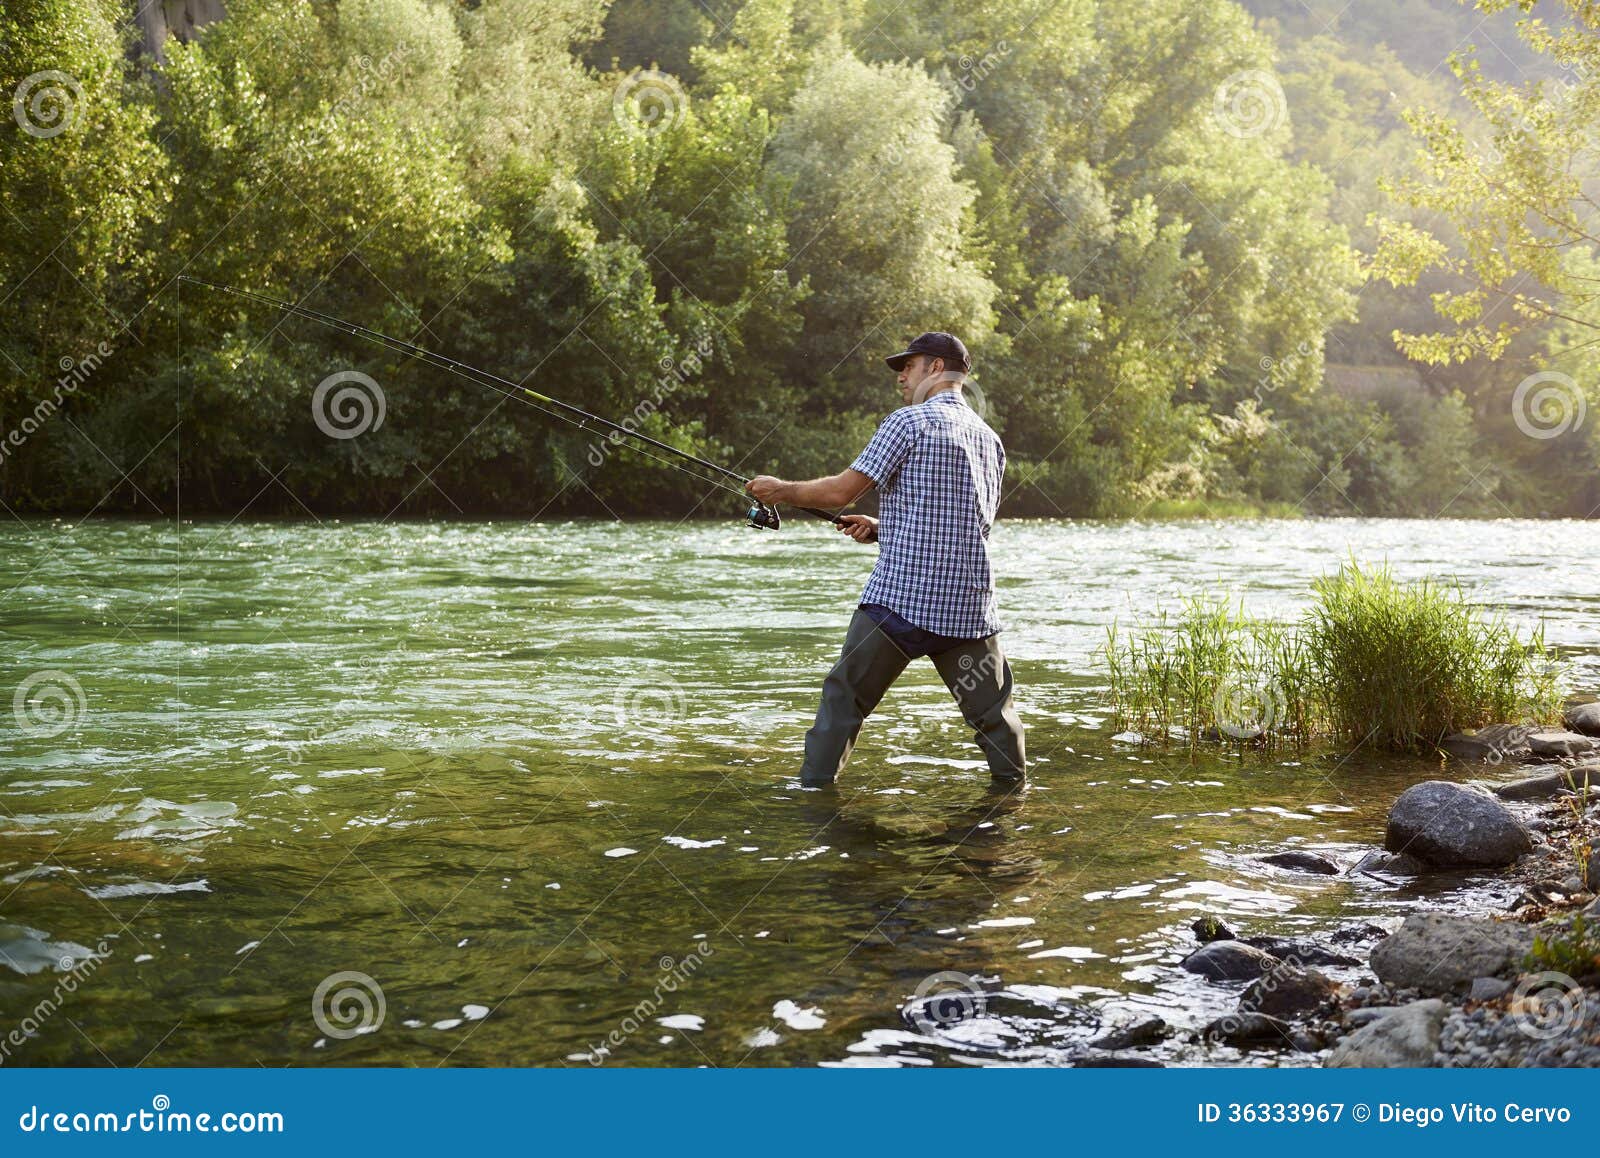 Fisherman Standing Near River and Holding Fishing Rod Stock Image